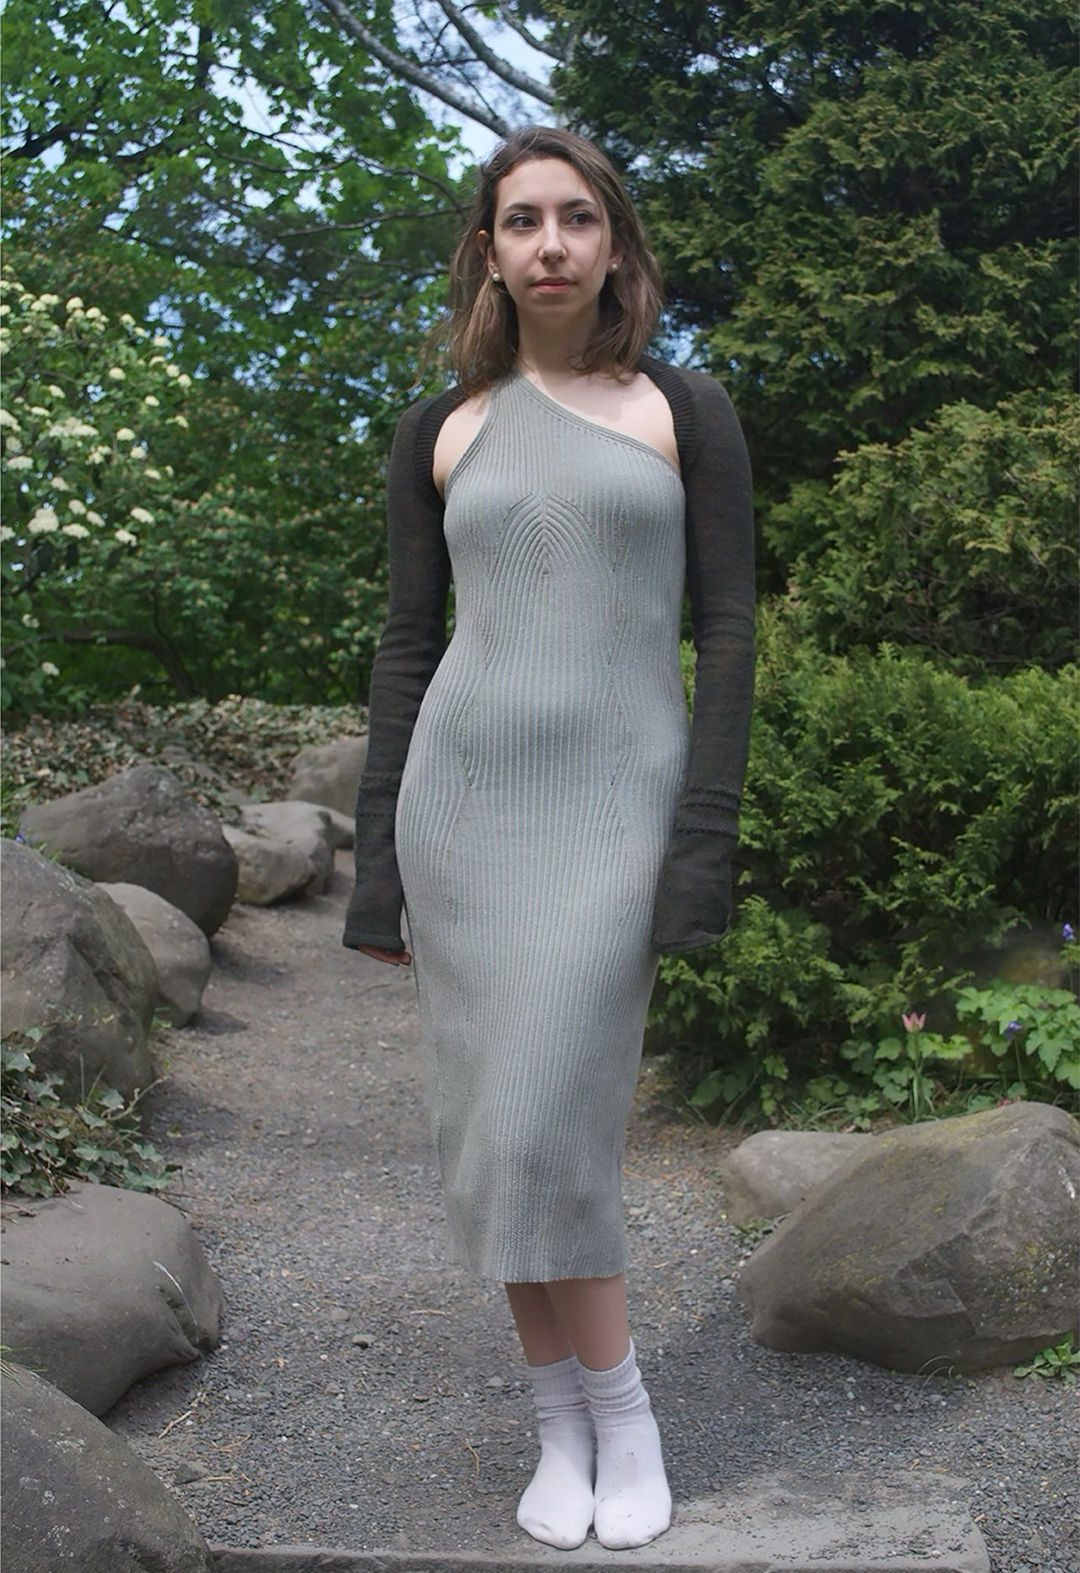 The photo shows a full front view of the dress worn with the shrug.